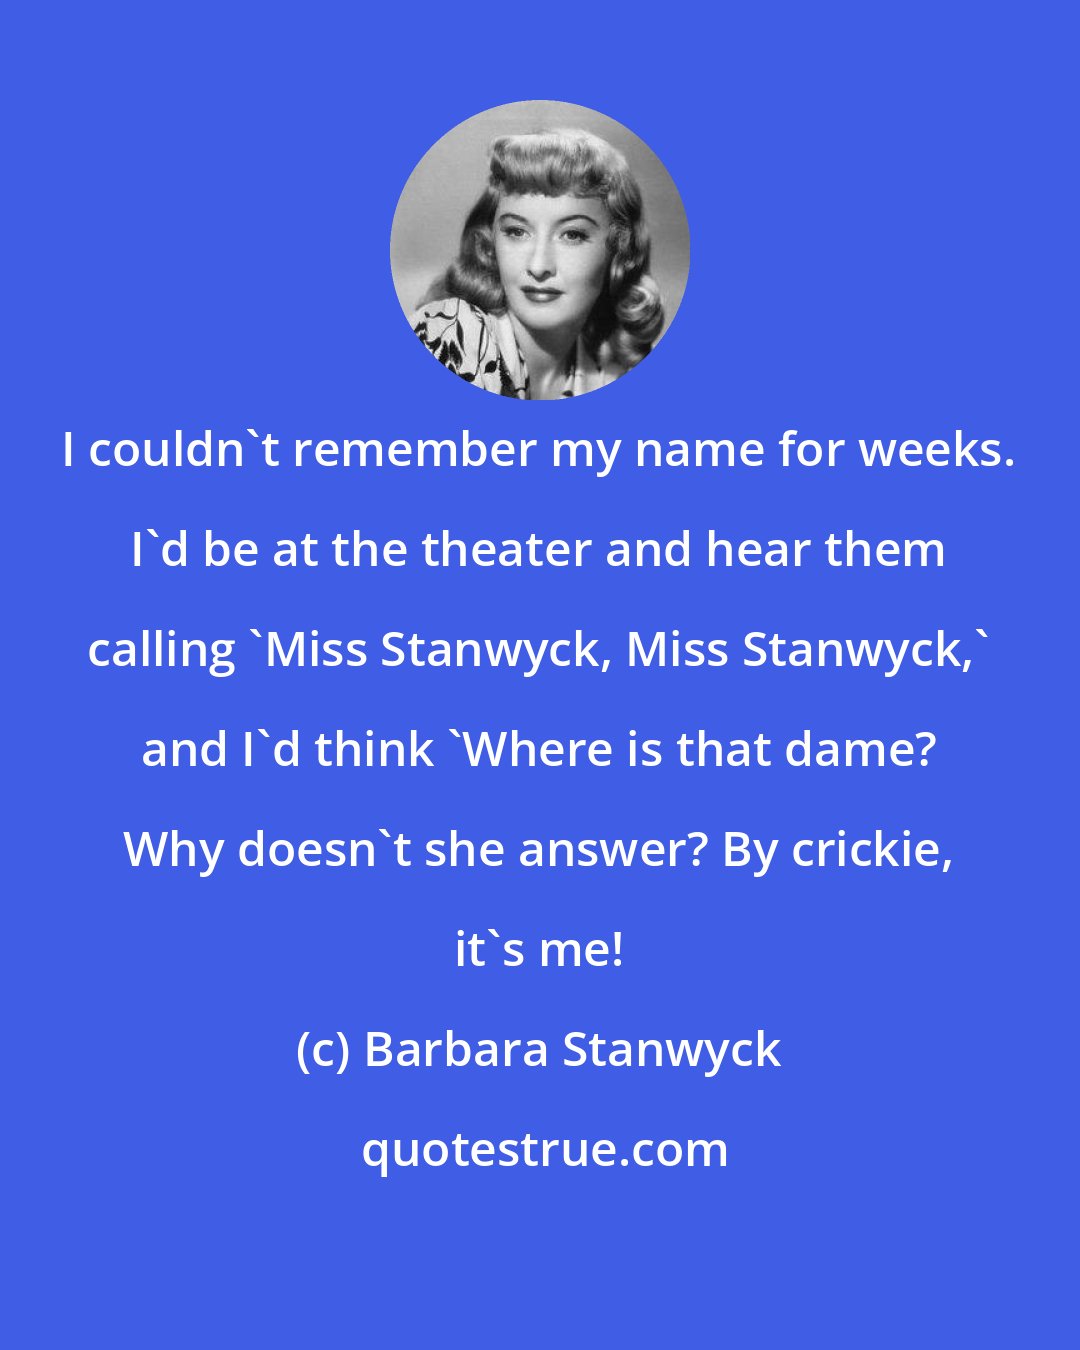 Barbara Stanwyck: I couldn't remember my name for weeks. I'd be at the theater and hear them calling 'Miss Stanwyck, Miss Stanwyck,' and I'd think 'Where is that dame? Why doesn't she answer? By crickie, it's me!